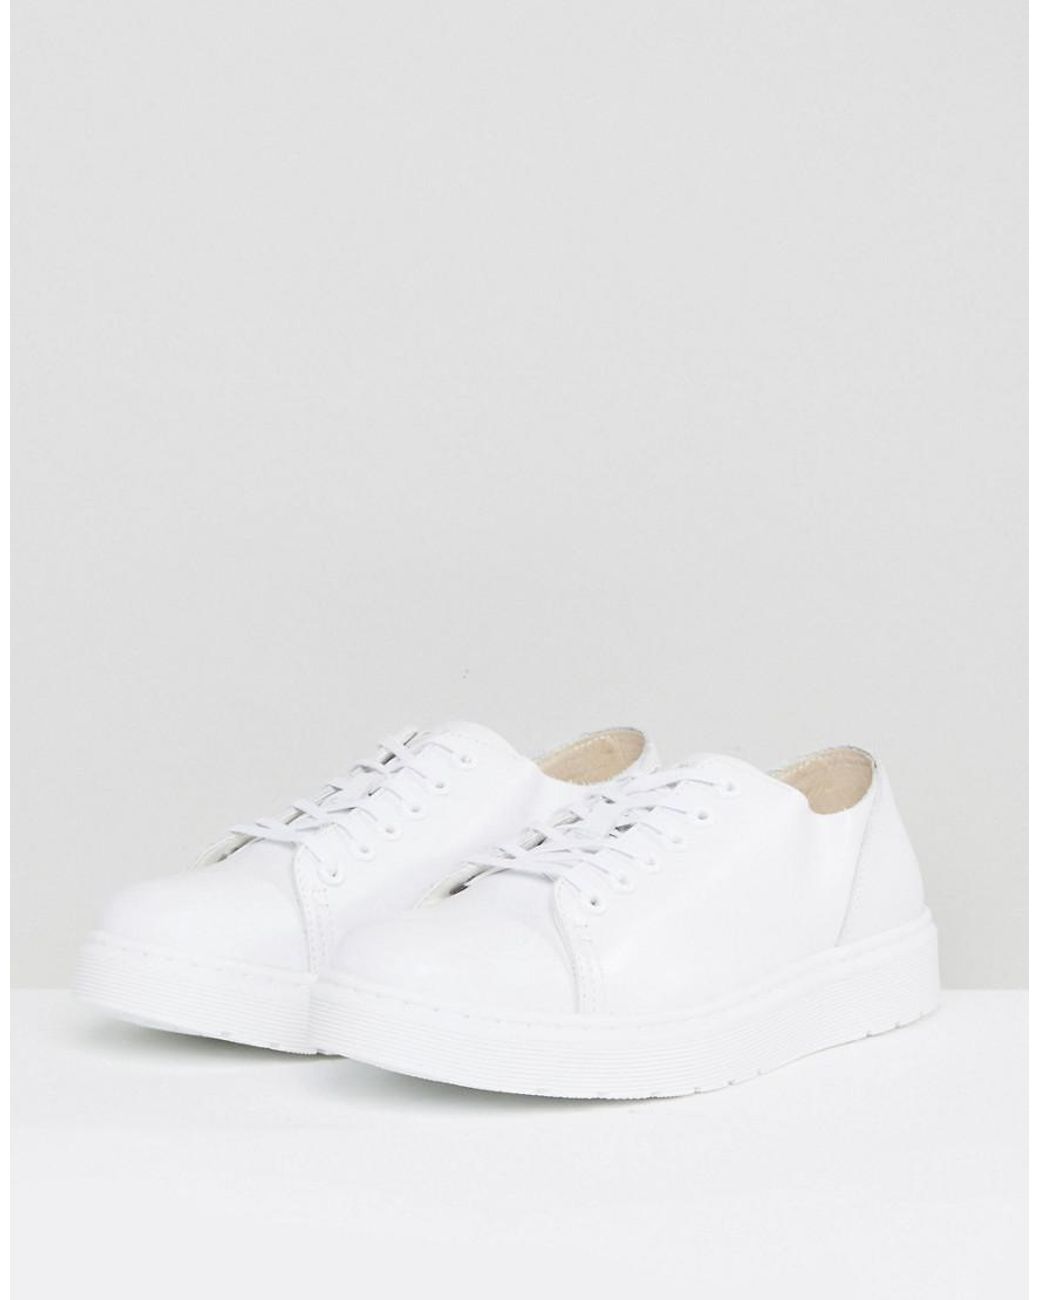 Dr. Martens Dante Leather Sneakers in White for Men | Lyst